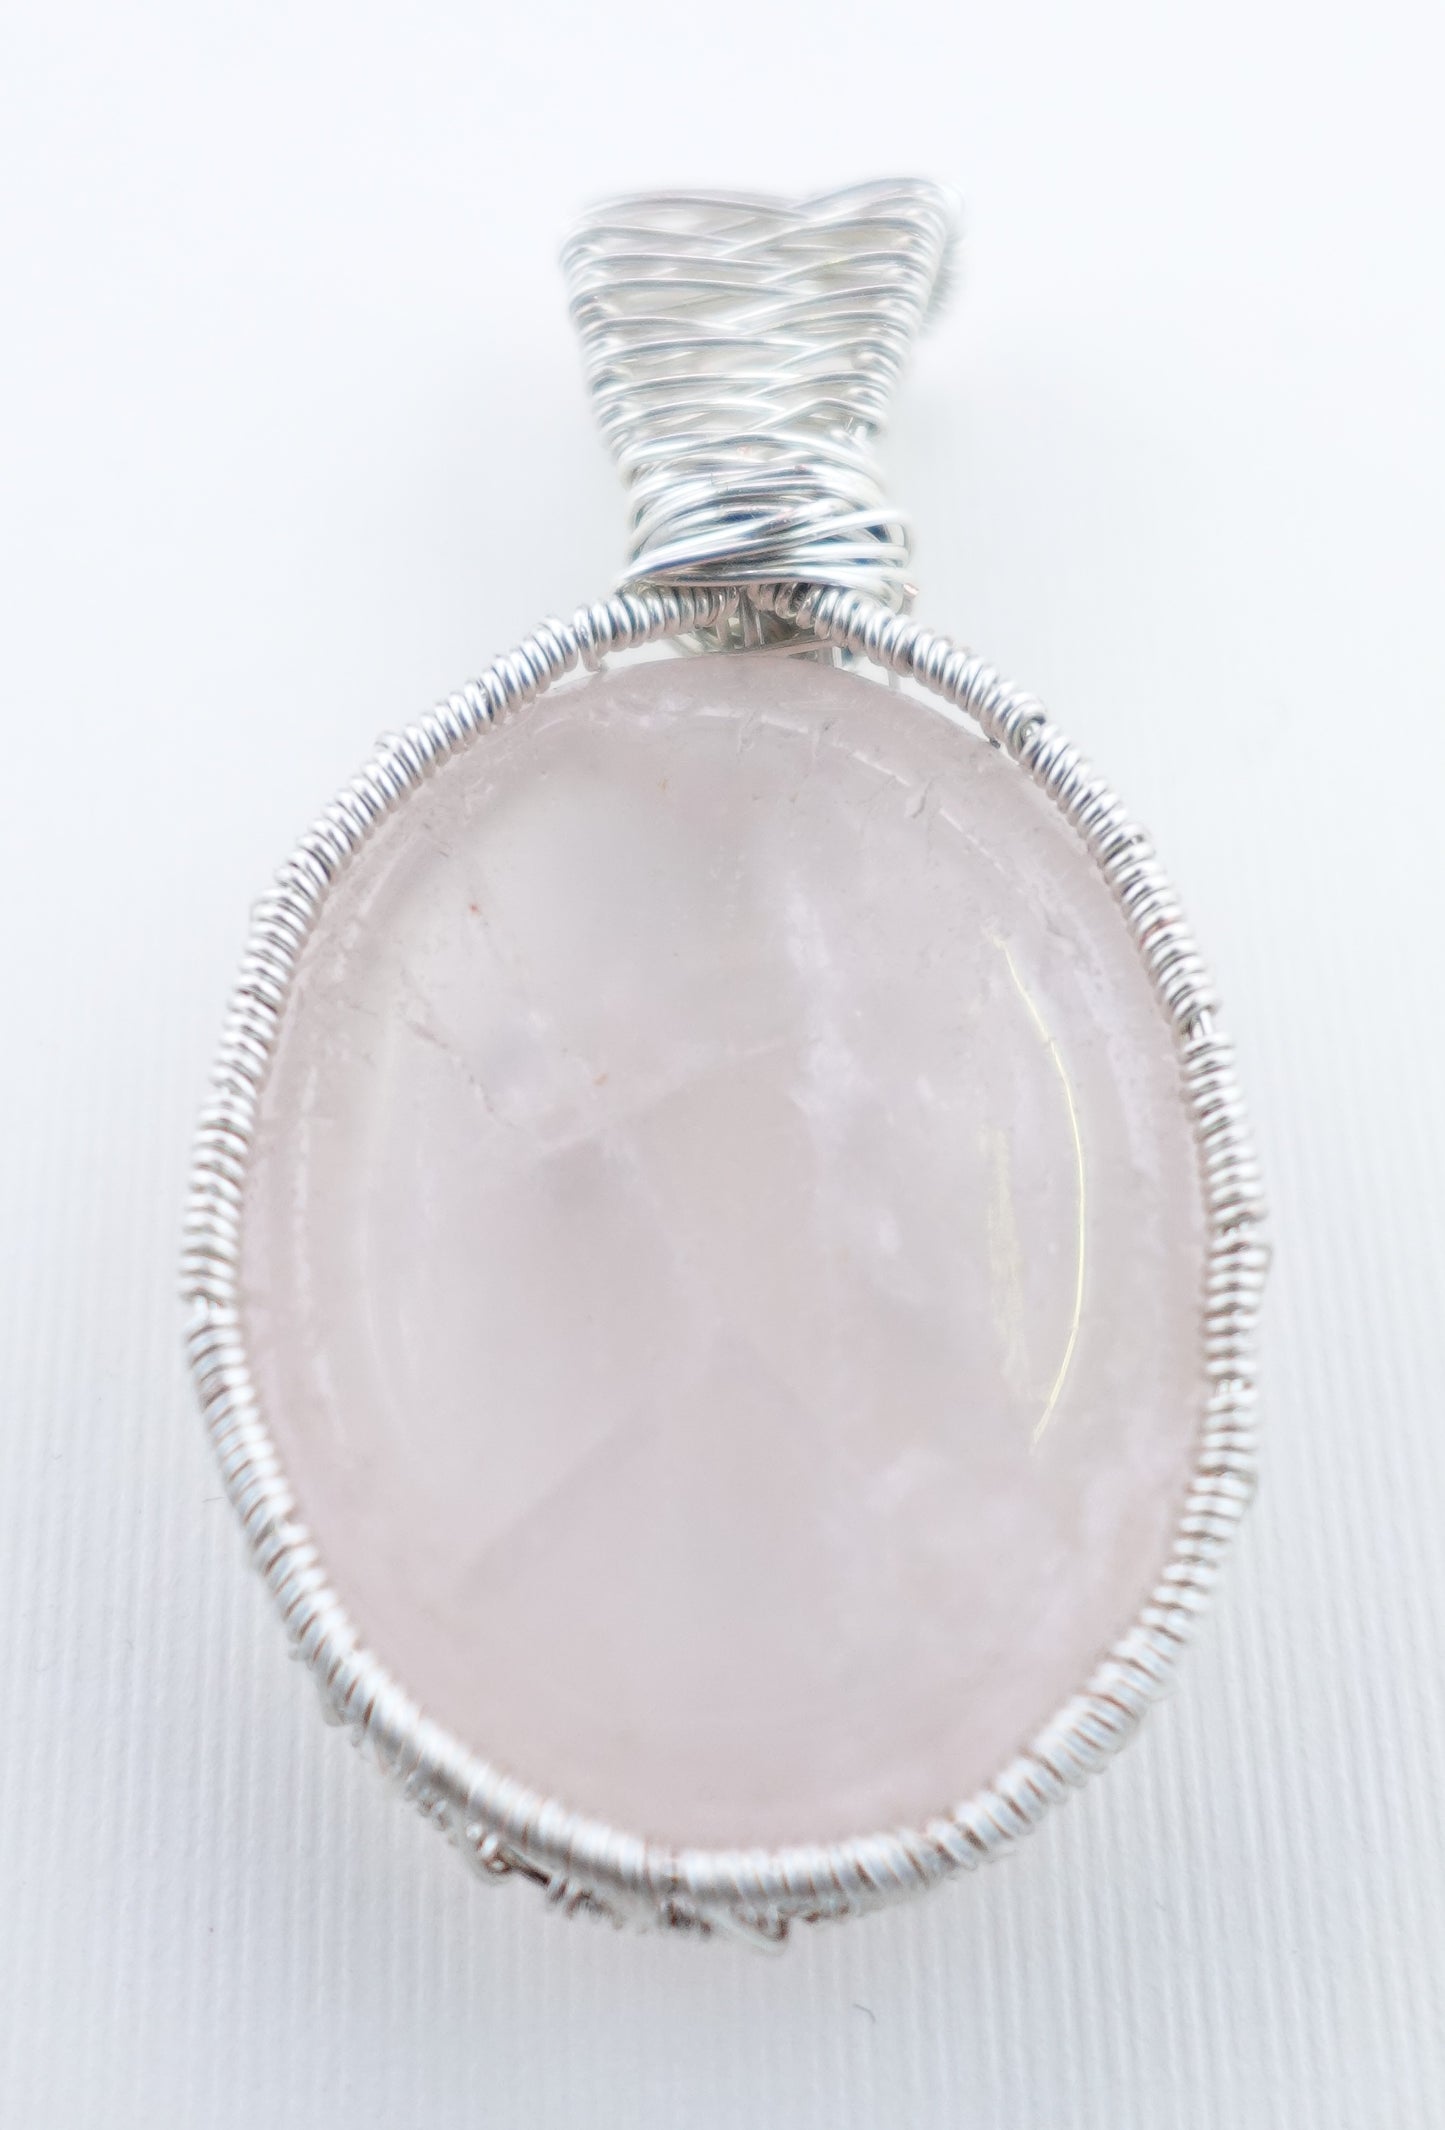 Oval Rose Quartz Worry Stone Pendant Wrapped in Silver Wire